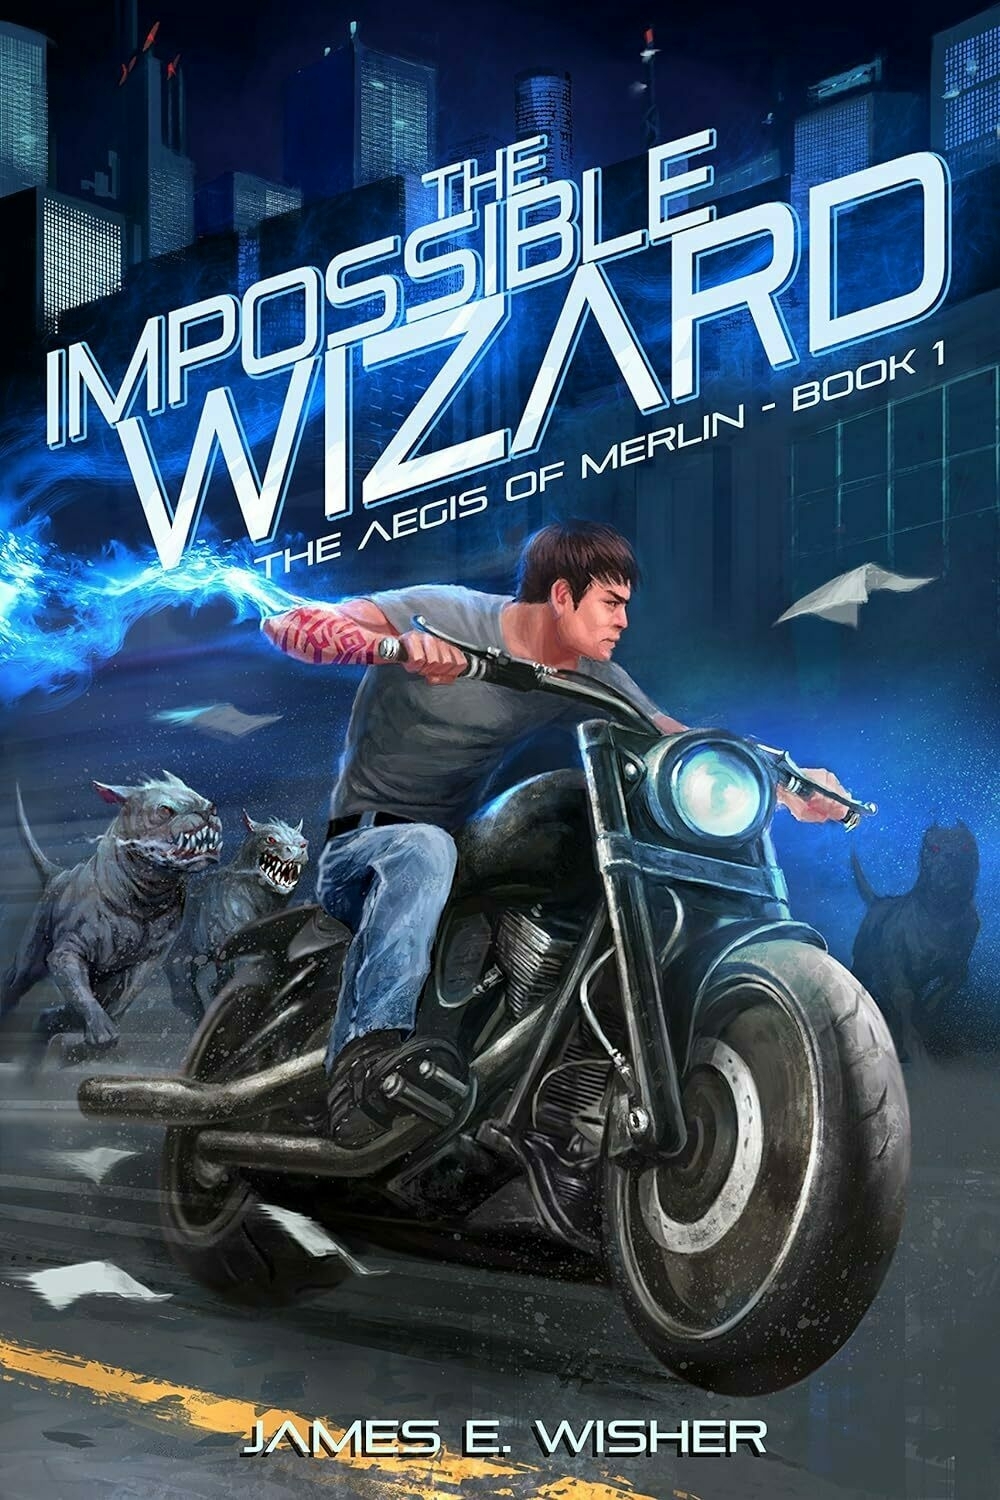 
A young man rides a motorcycle, wielding magic, chased by monstrous creatures in an urban nighttime setting. Text: 'THE IMPOSSIBLE WIZARD - THE AEGIS OF MERLIN - BOOK 1 - JAMES E. WISHER'